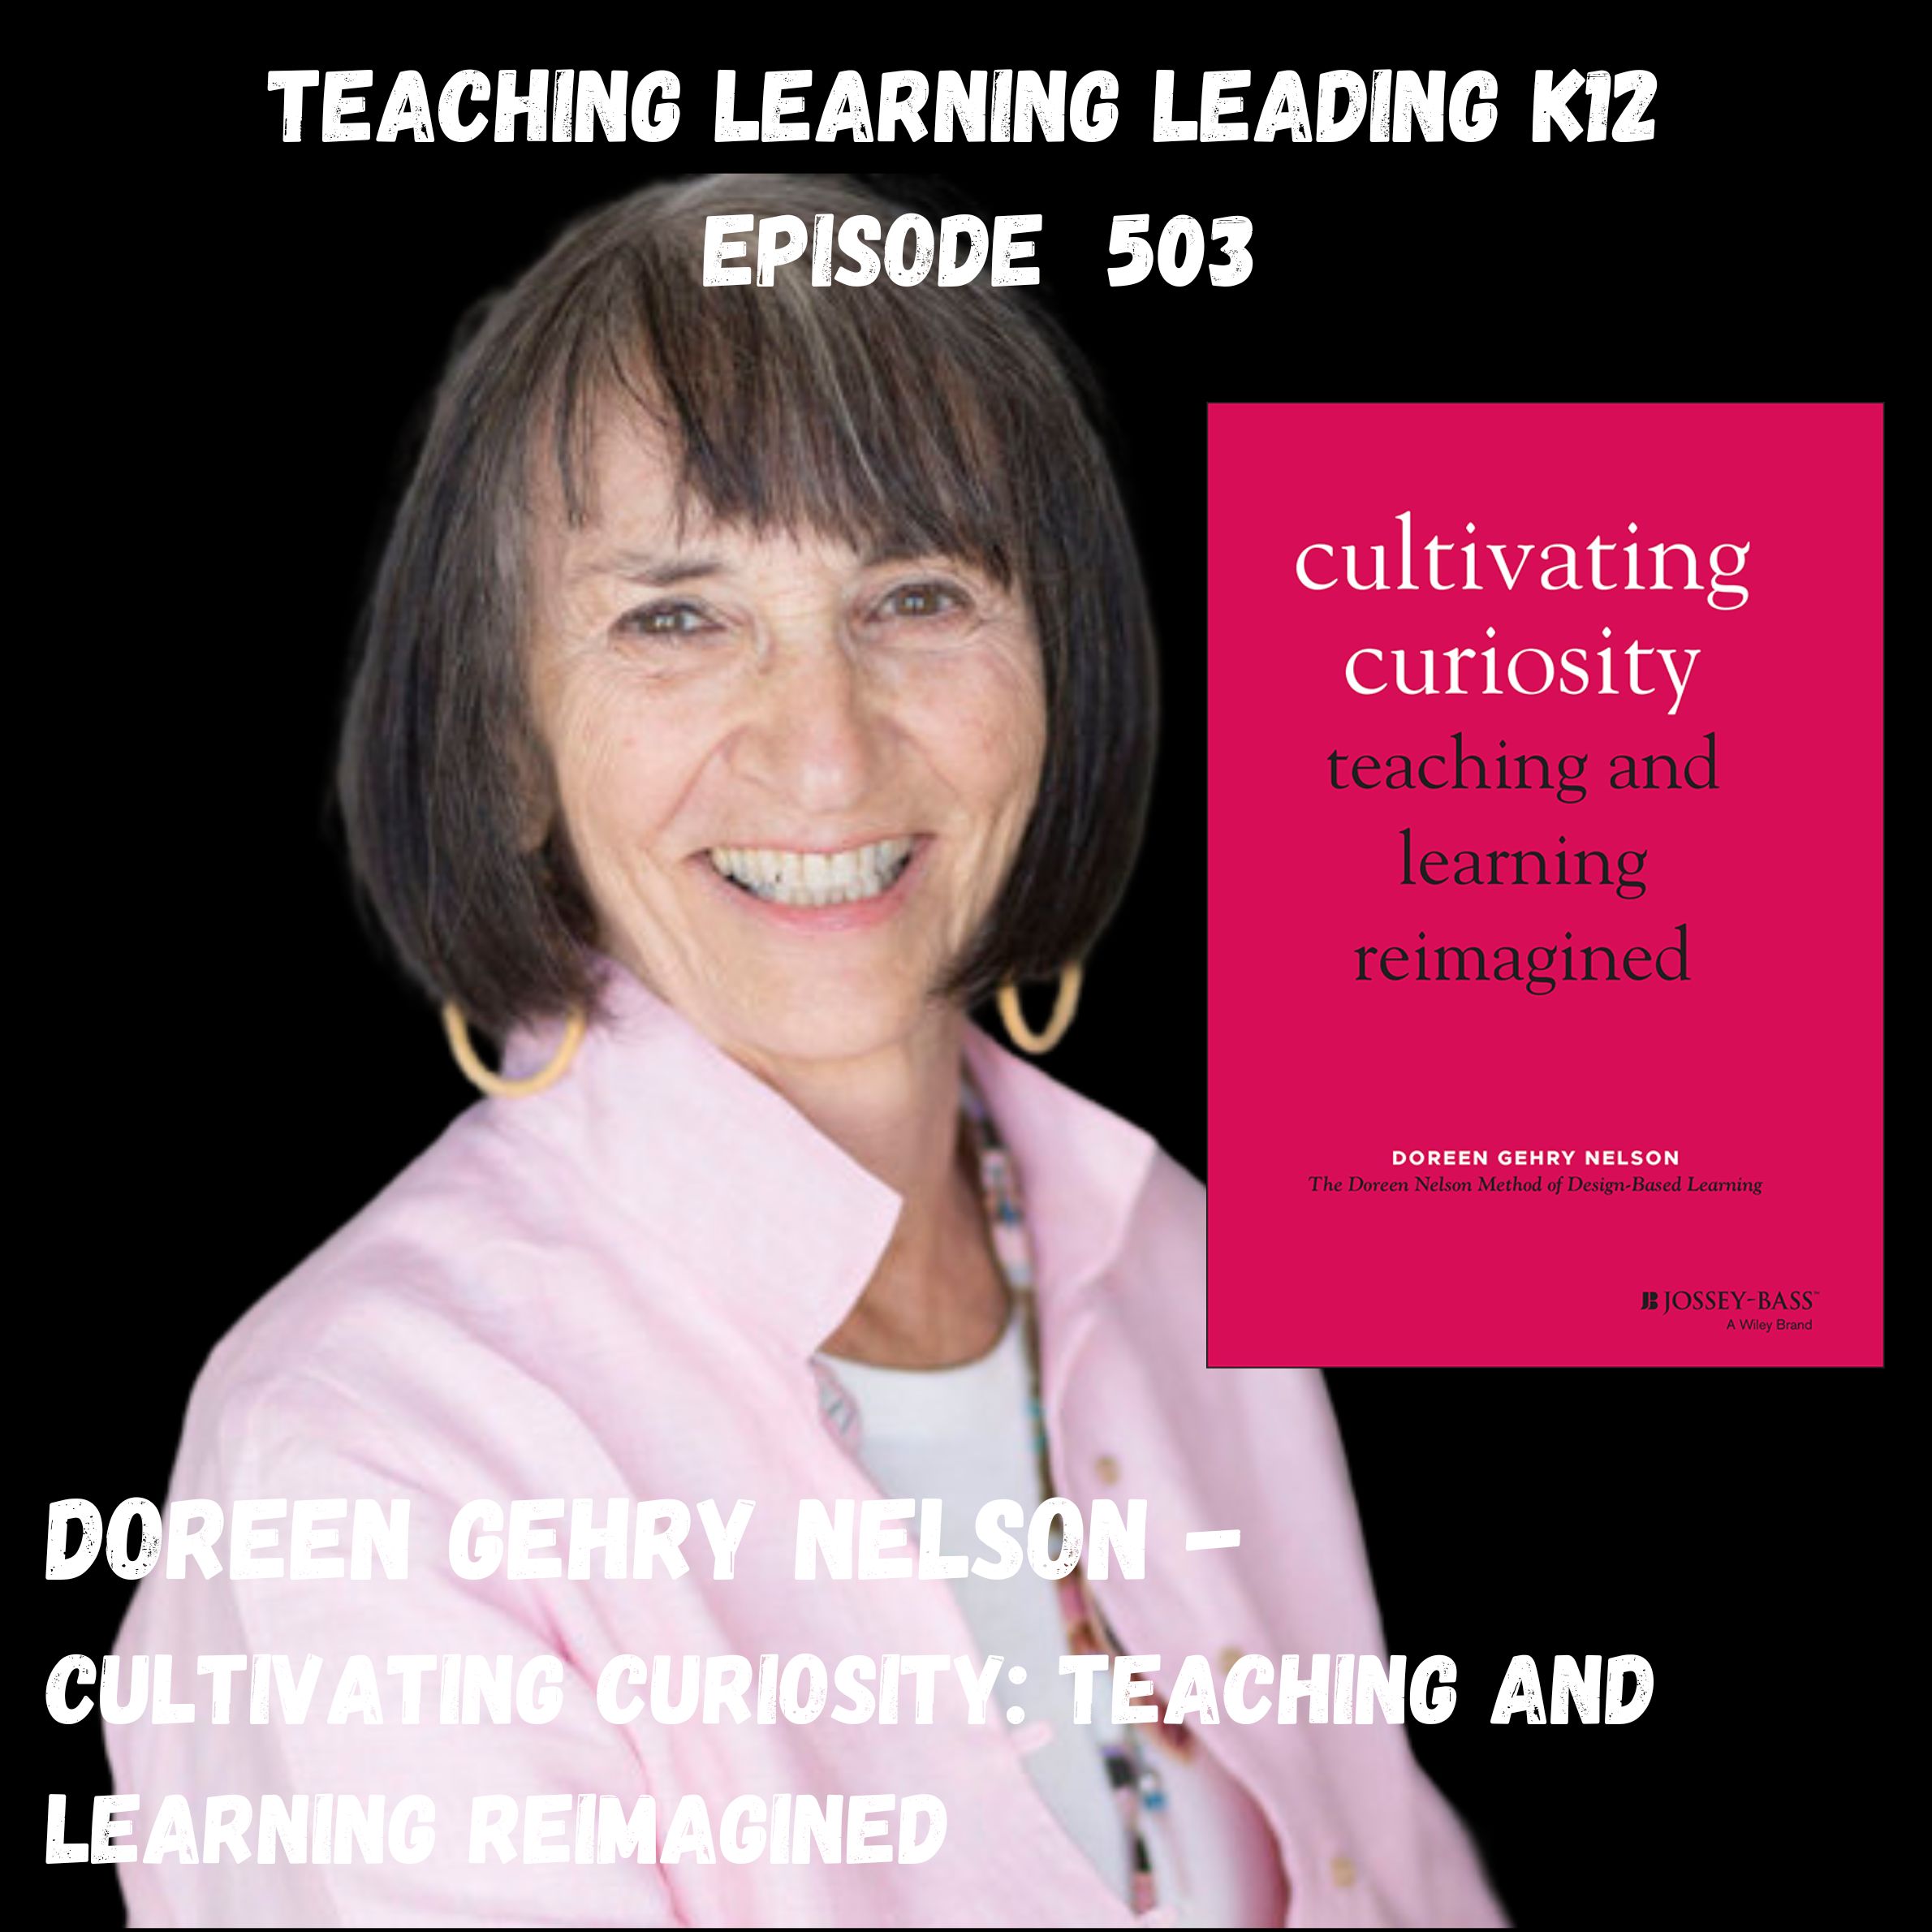 Doreen Gehry Nelson - Cultivating Curiosity: Teaching and Learning Reimagined - 503 Image